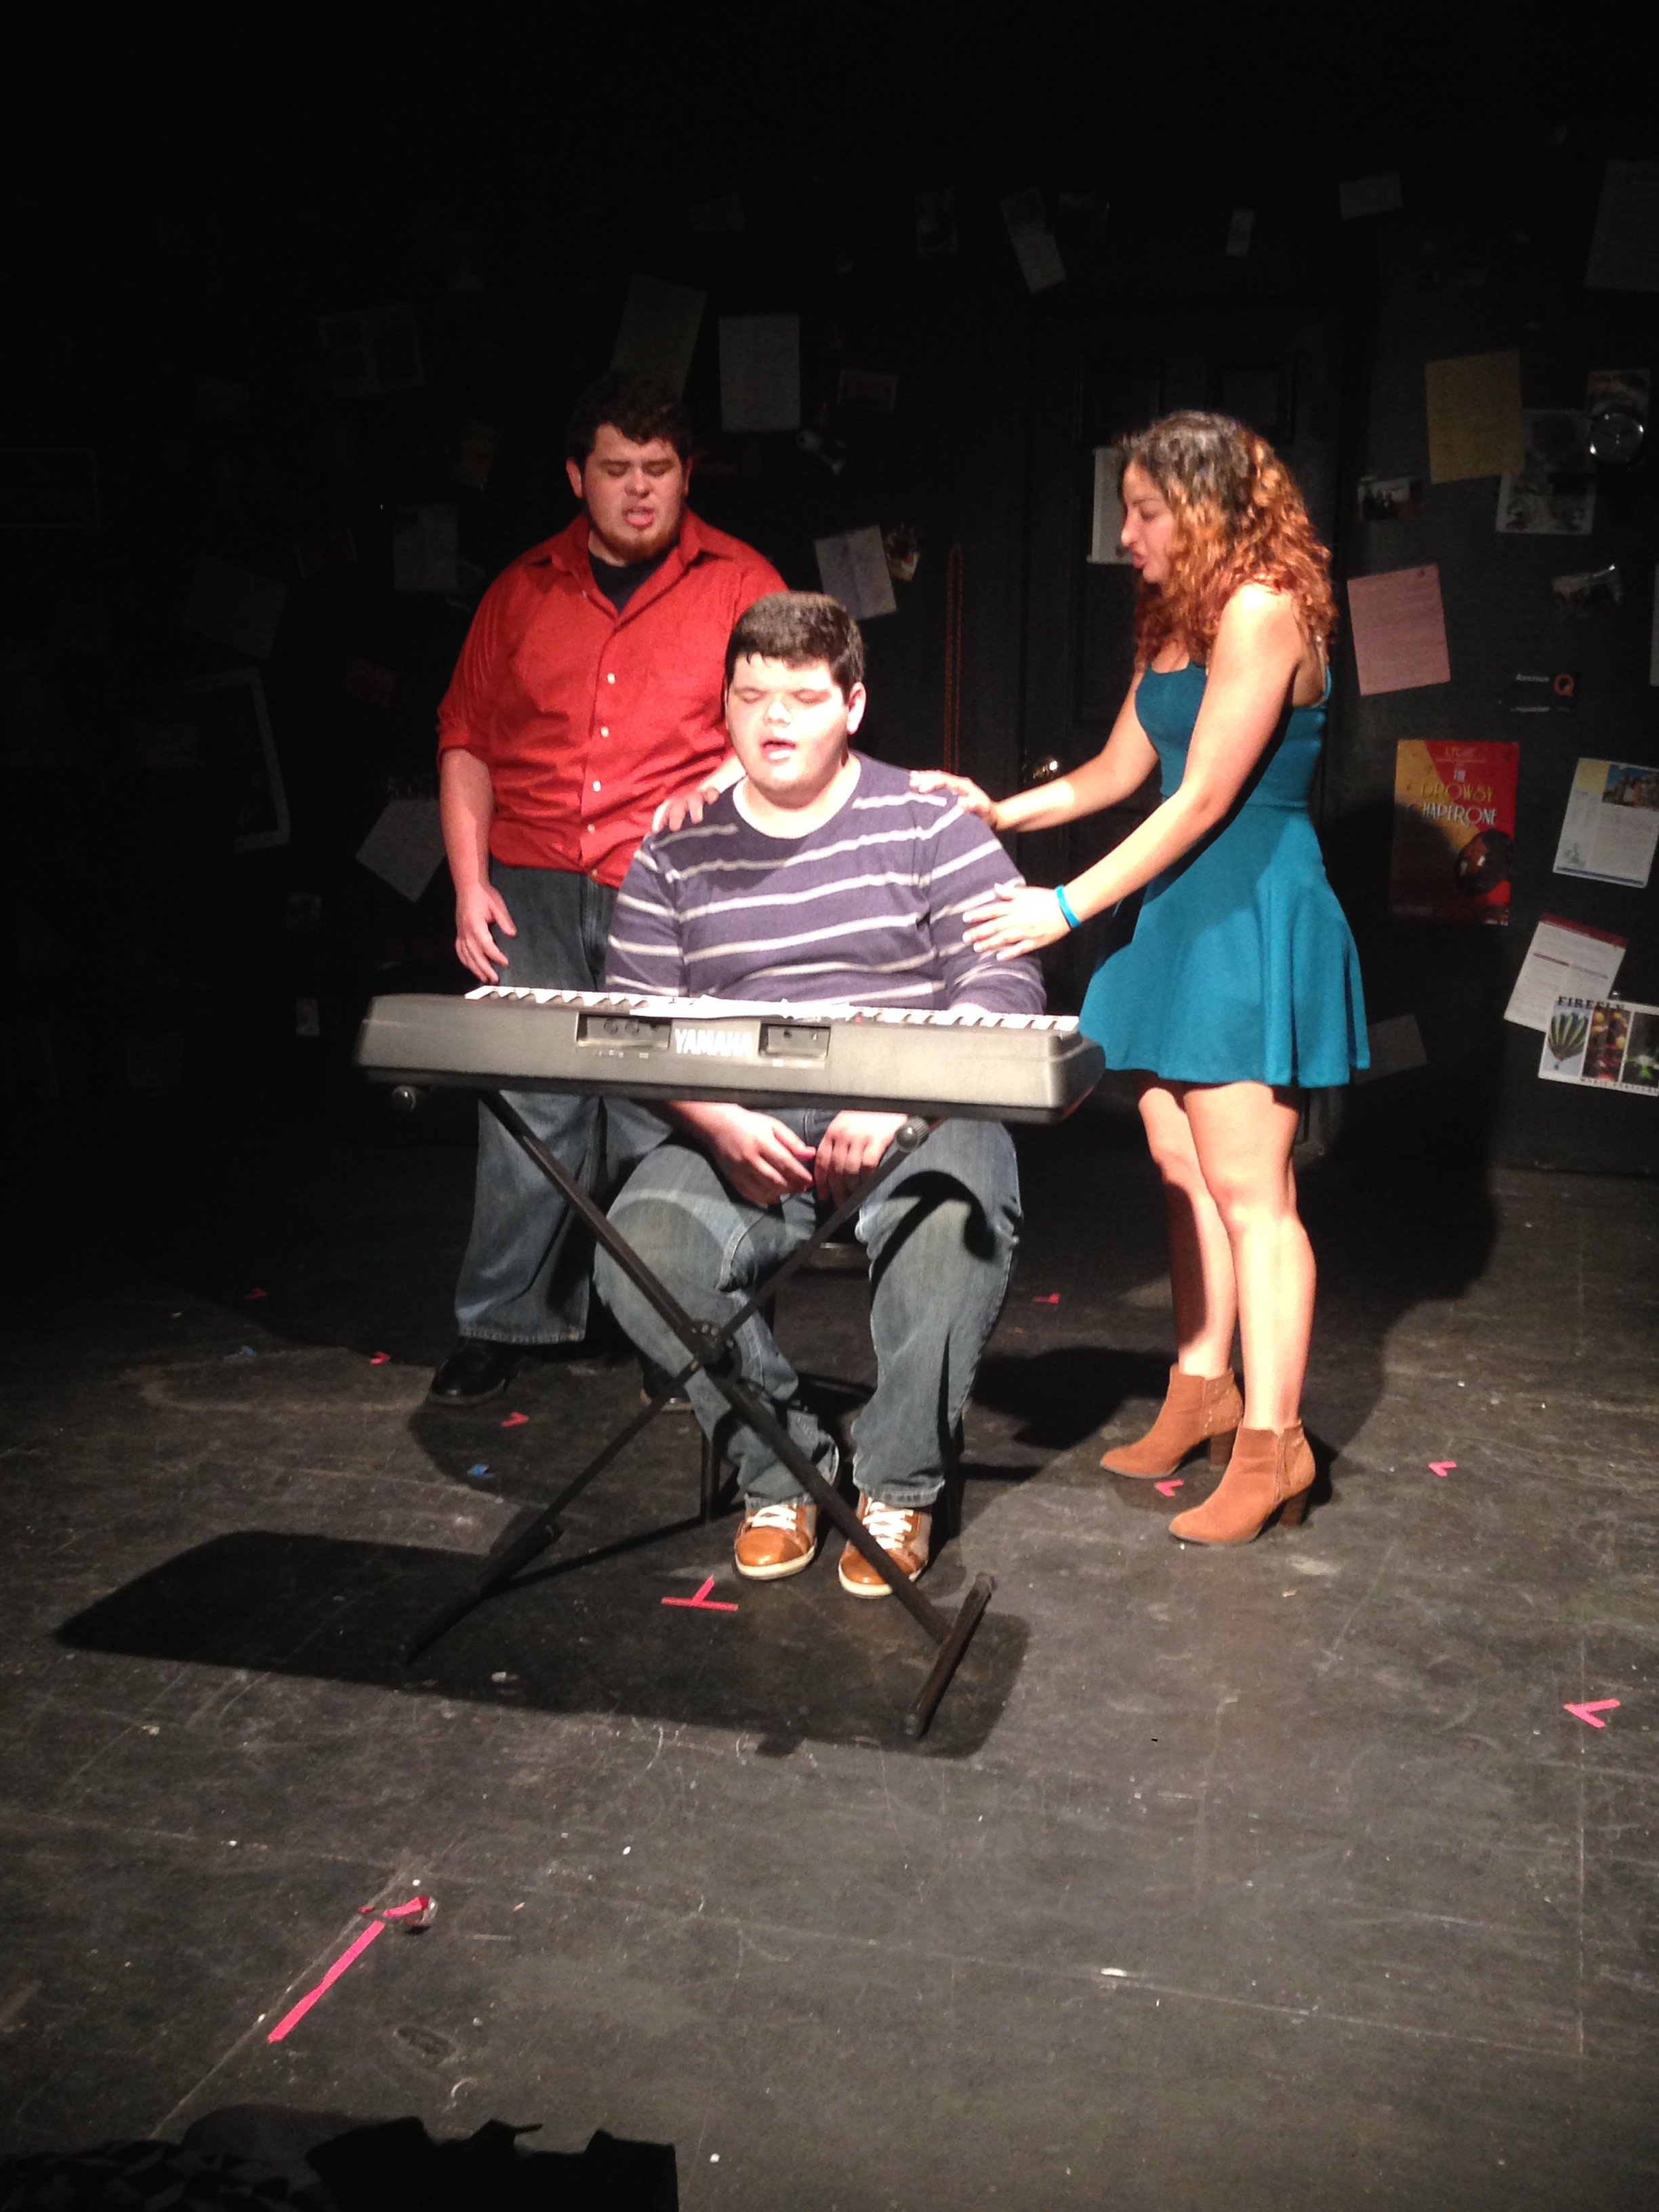  Justin Luckenbaugh, Tyler Conroy, and Krystina Matos during "Johnny Can't Decide" from  Tick, Tick...Boom!  